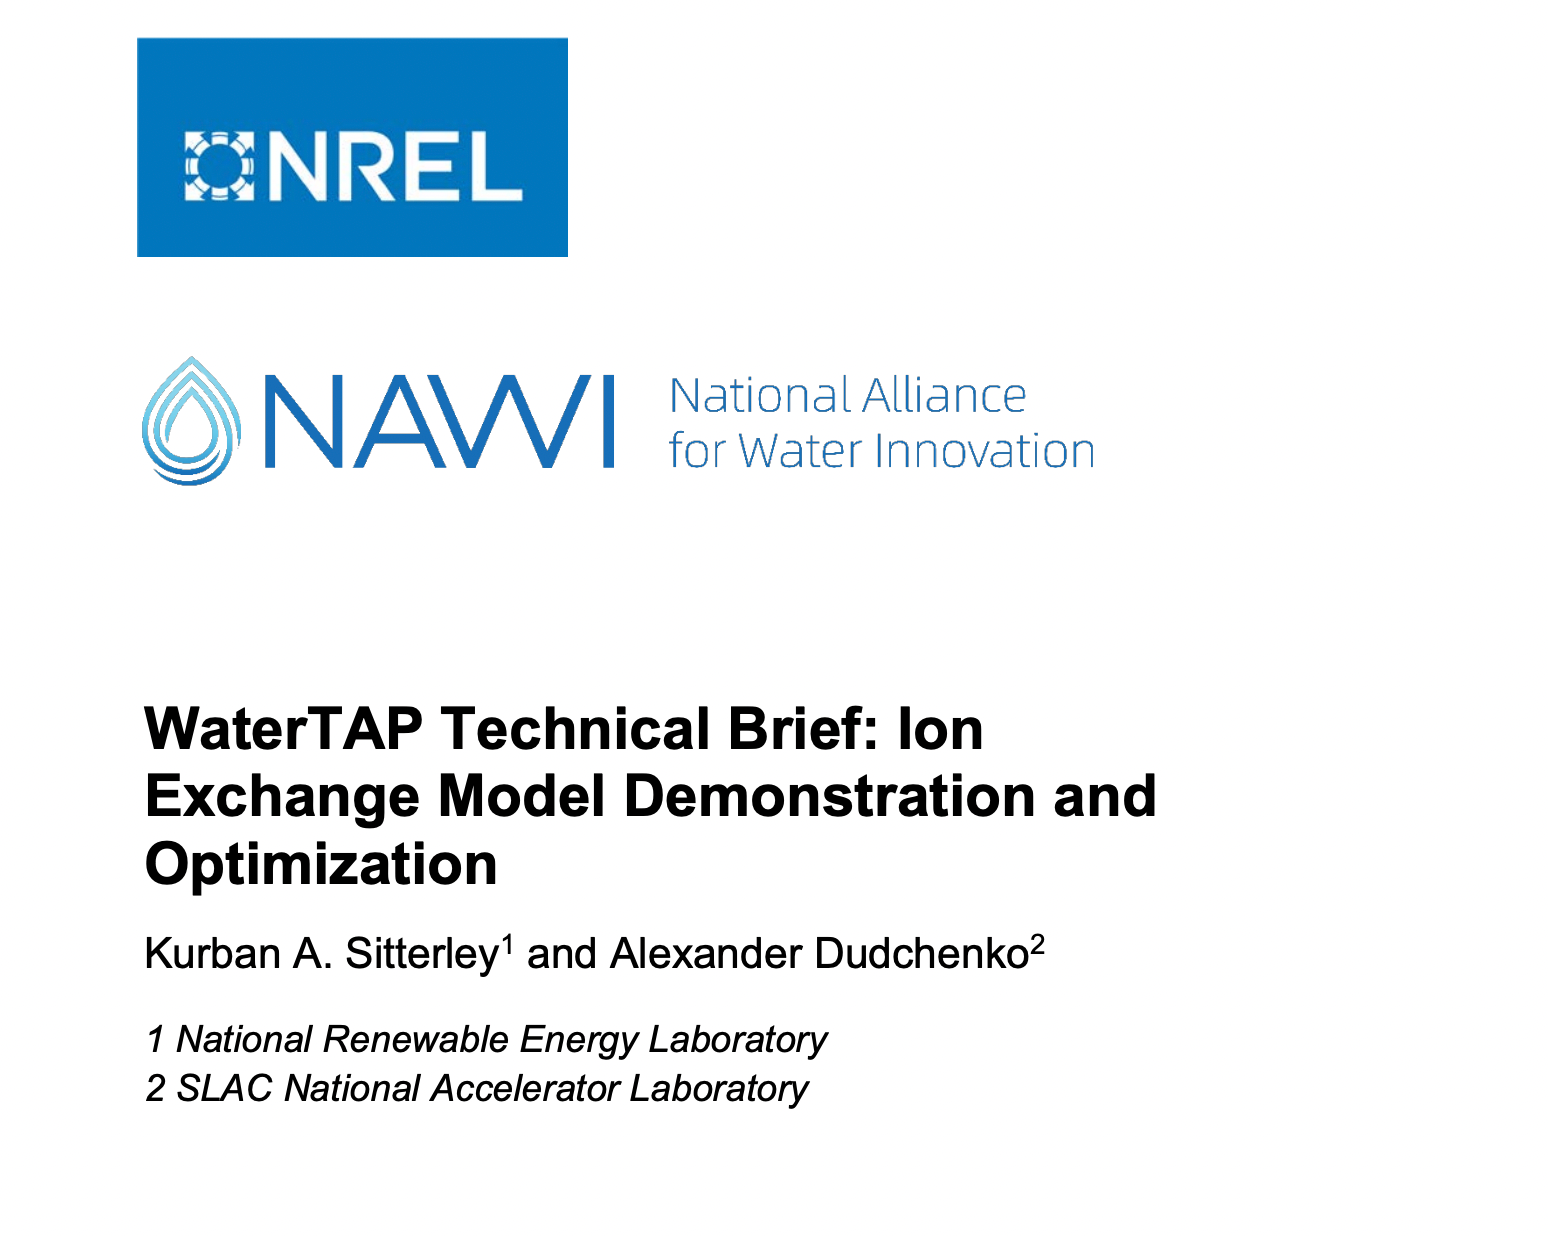 WaterTAP Technical Brief: Ion Exchange Model Demonstration and Optimization